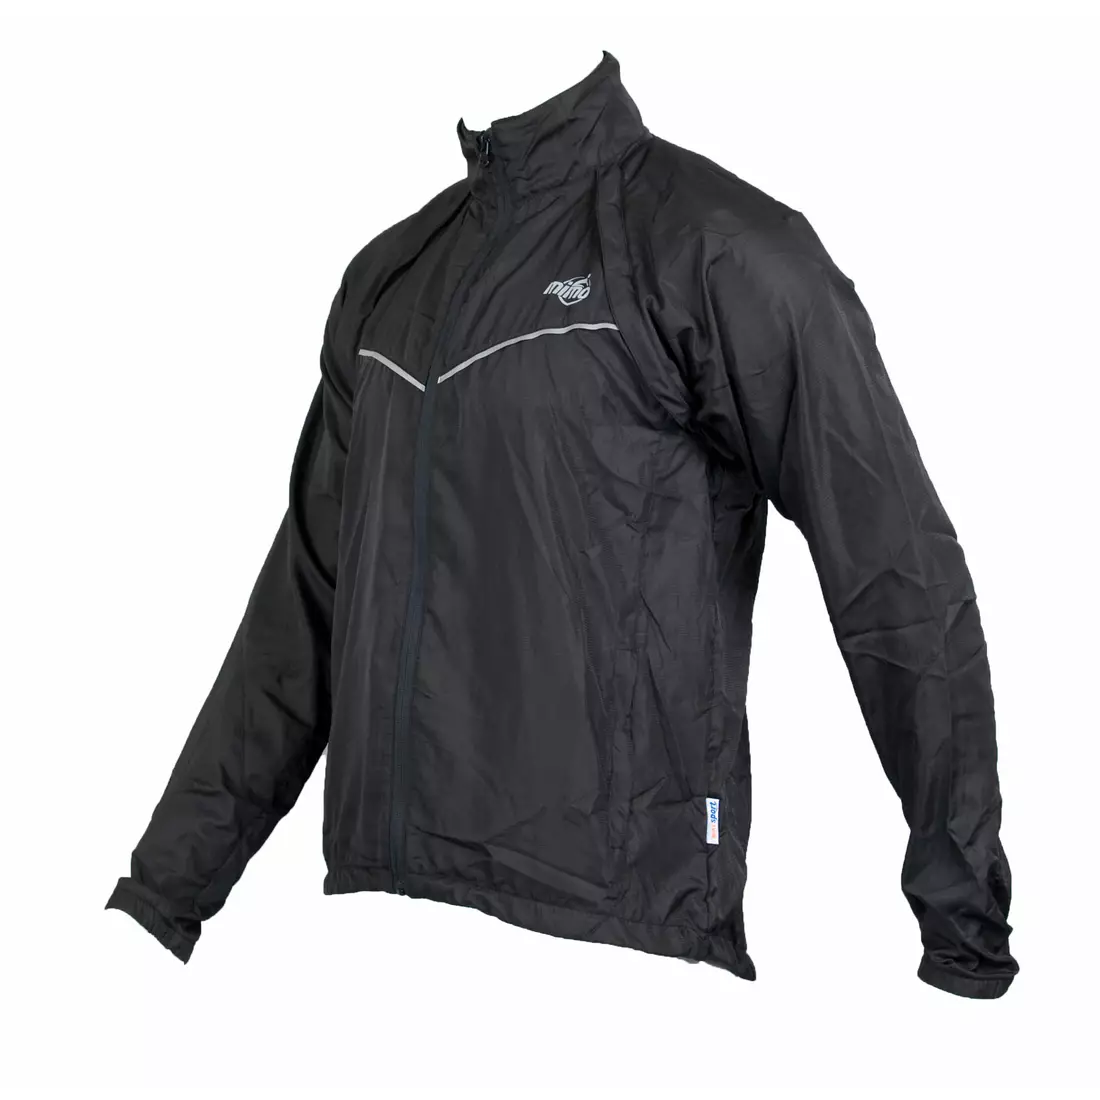 MikeSPORT SWORD - cycling jacket, detachable sleeves, color: Black